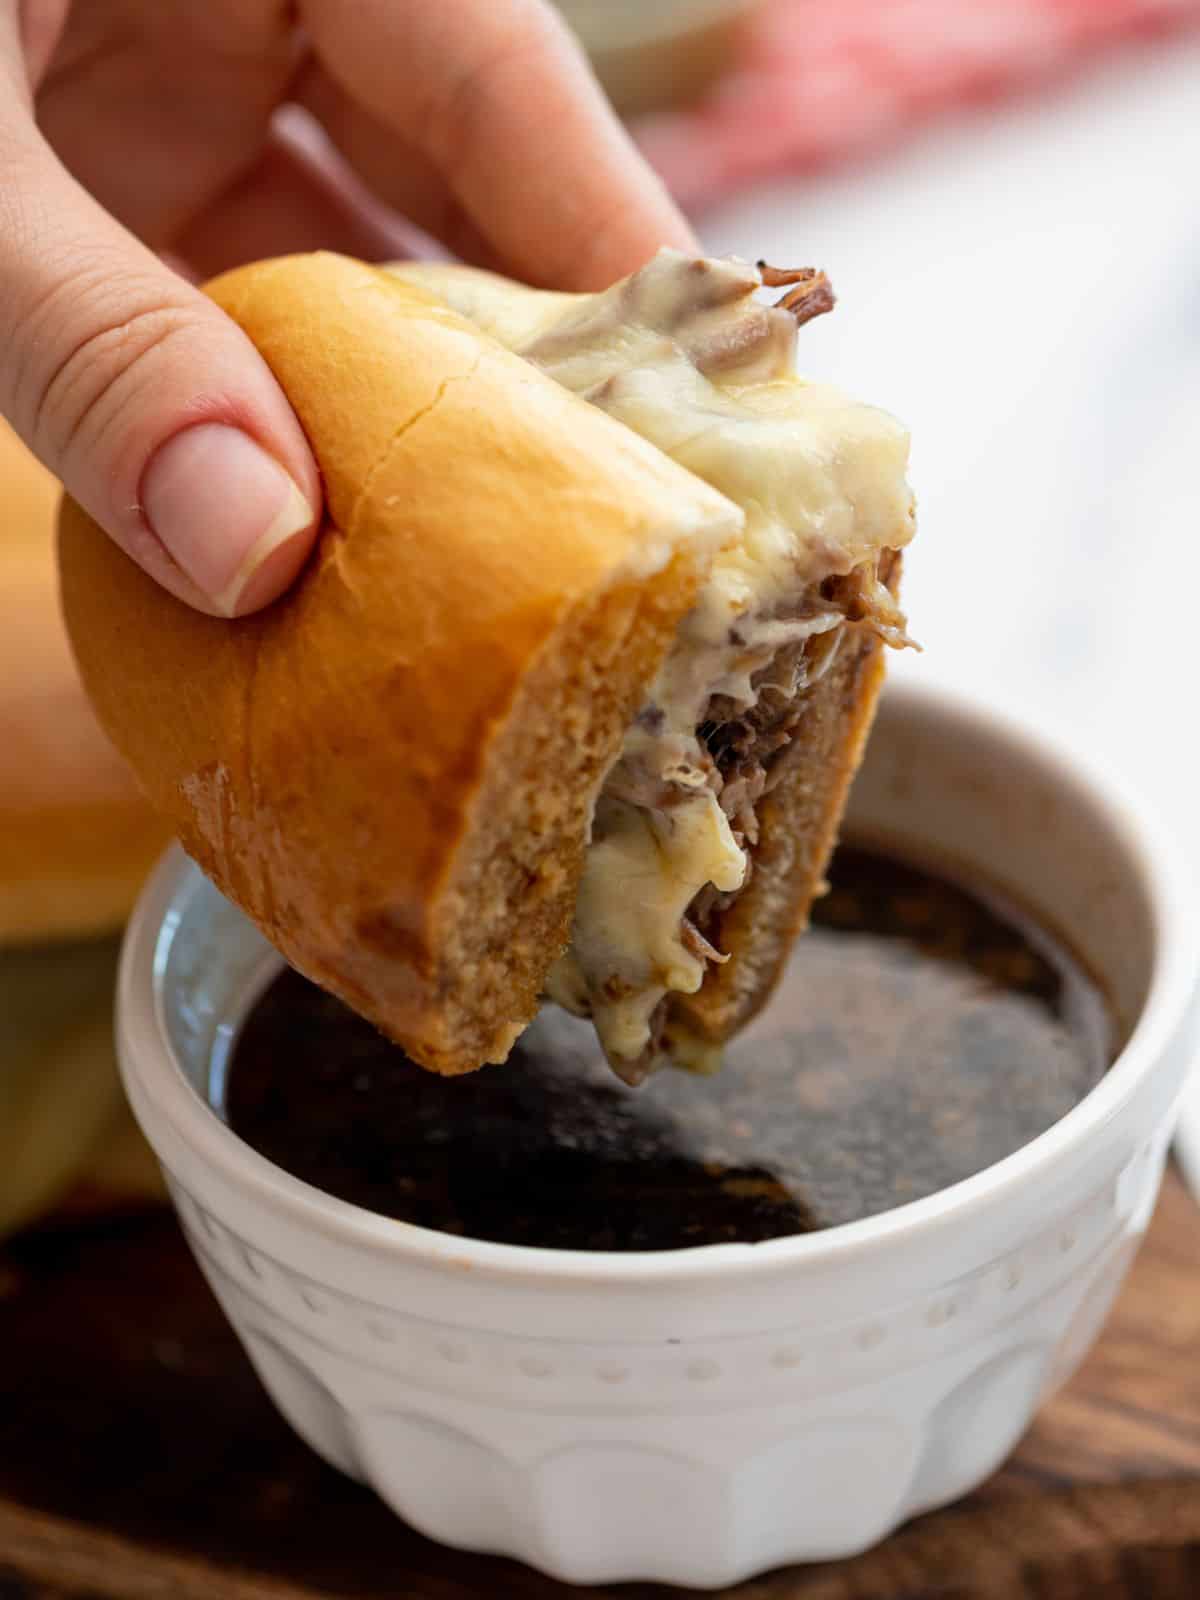 French Dip sandwich made with Instant Pot shredded beef being dipped into au jus.